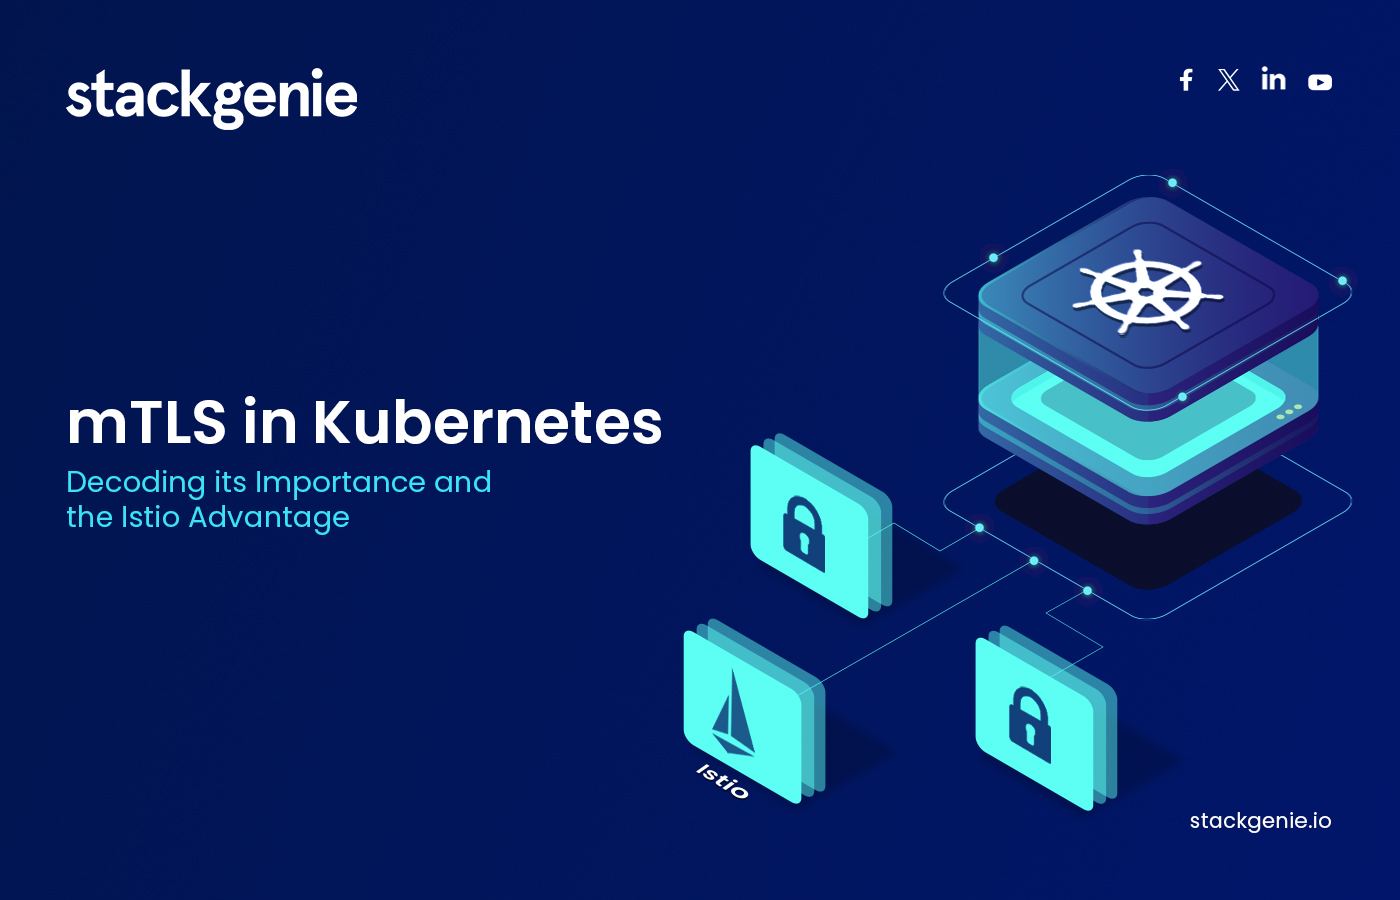 mTLS in Kubernetes: Decoding its Importance and the Istio Advantage